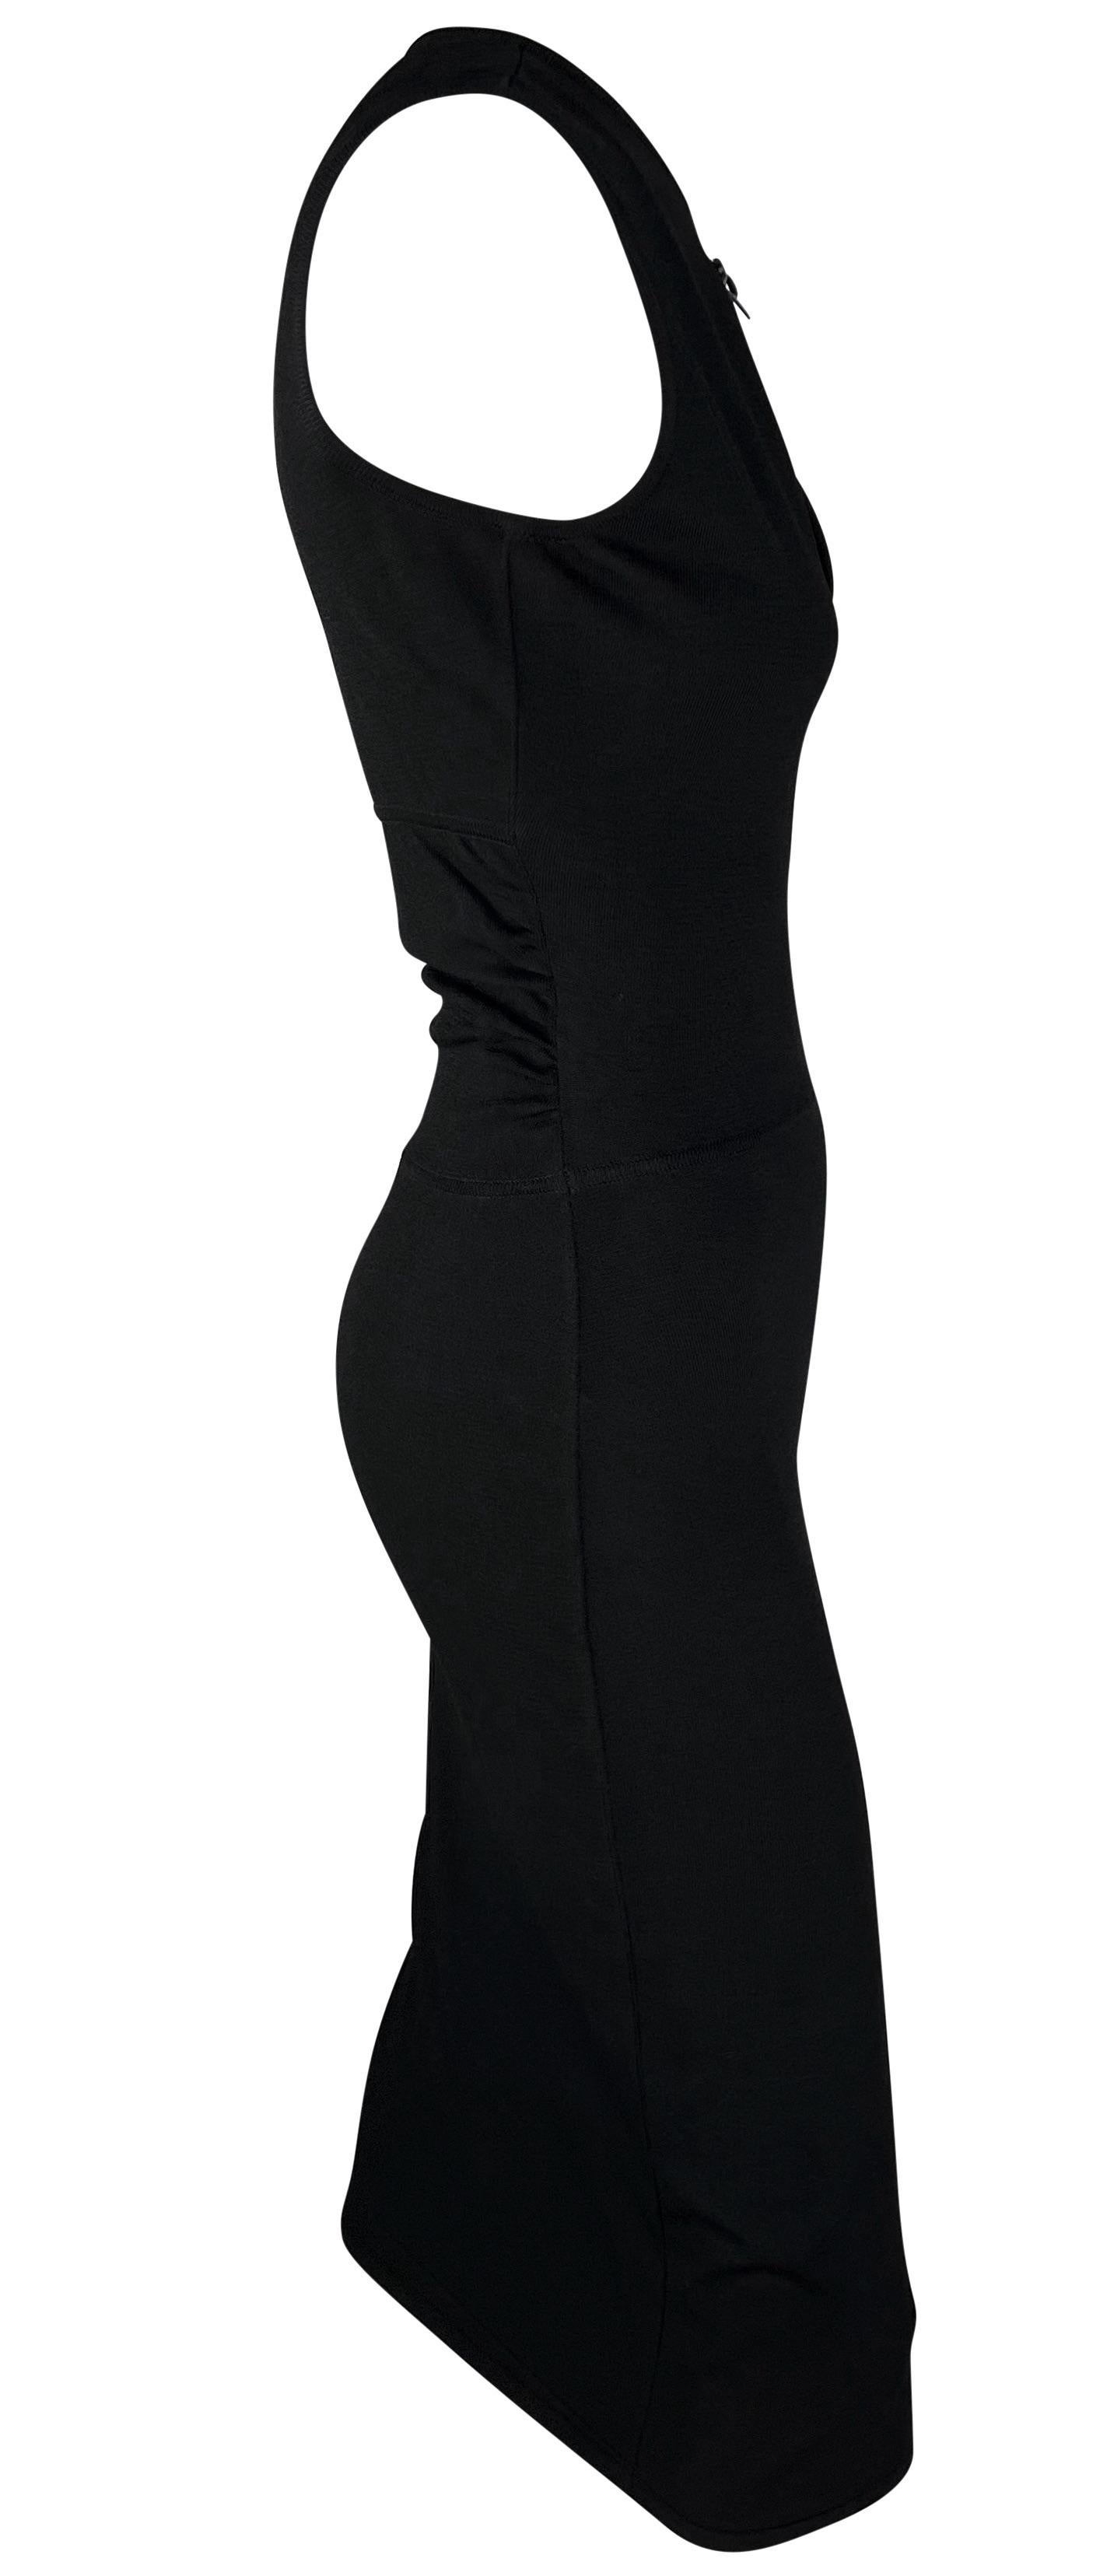 S/S 2000 Gucci by Tom Ford Black Stretch Knit Leather Bow Sleeveless Dress For Sale 2